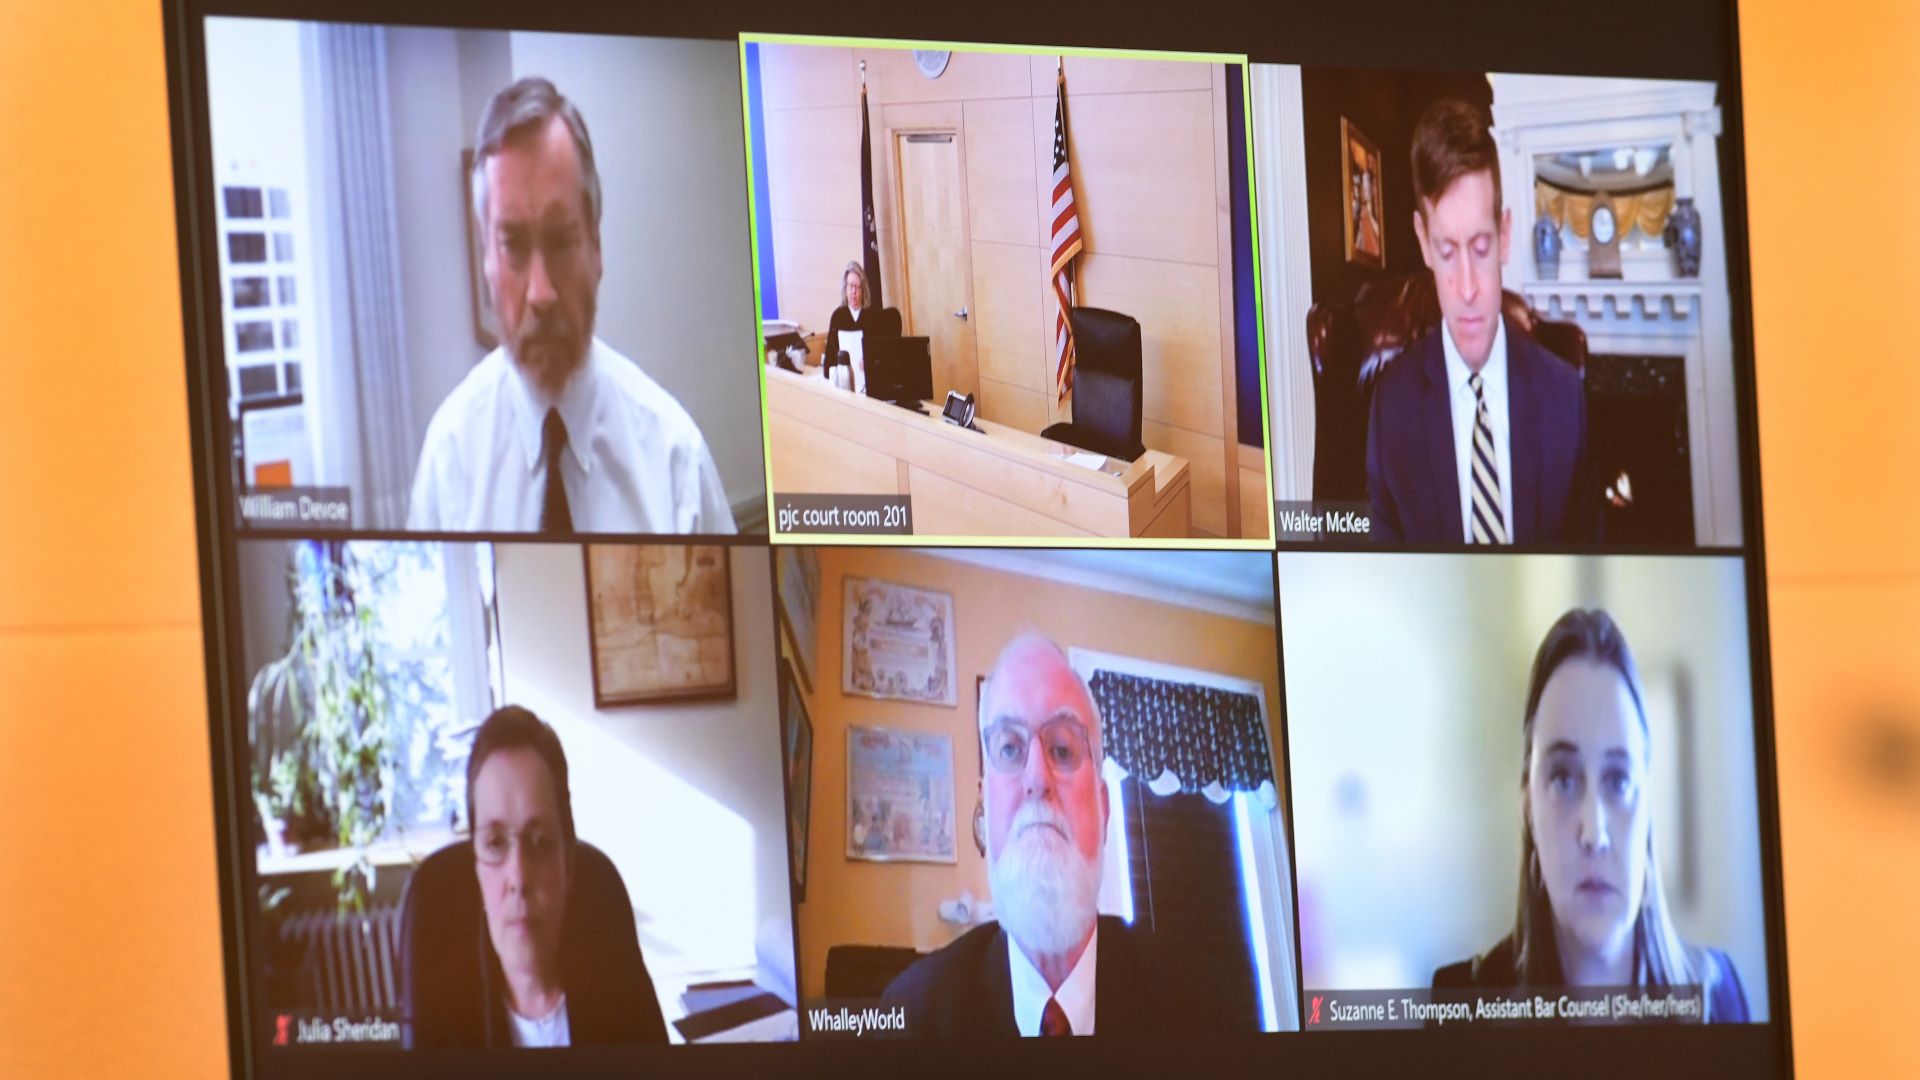 A screen showing the six participants of the disciplinary hearing.